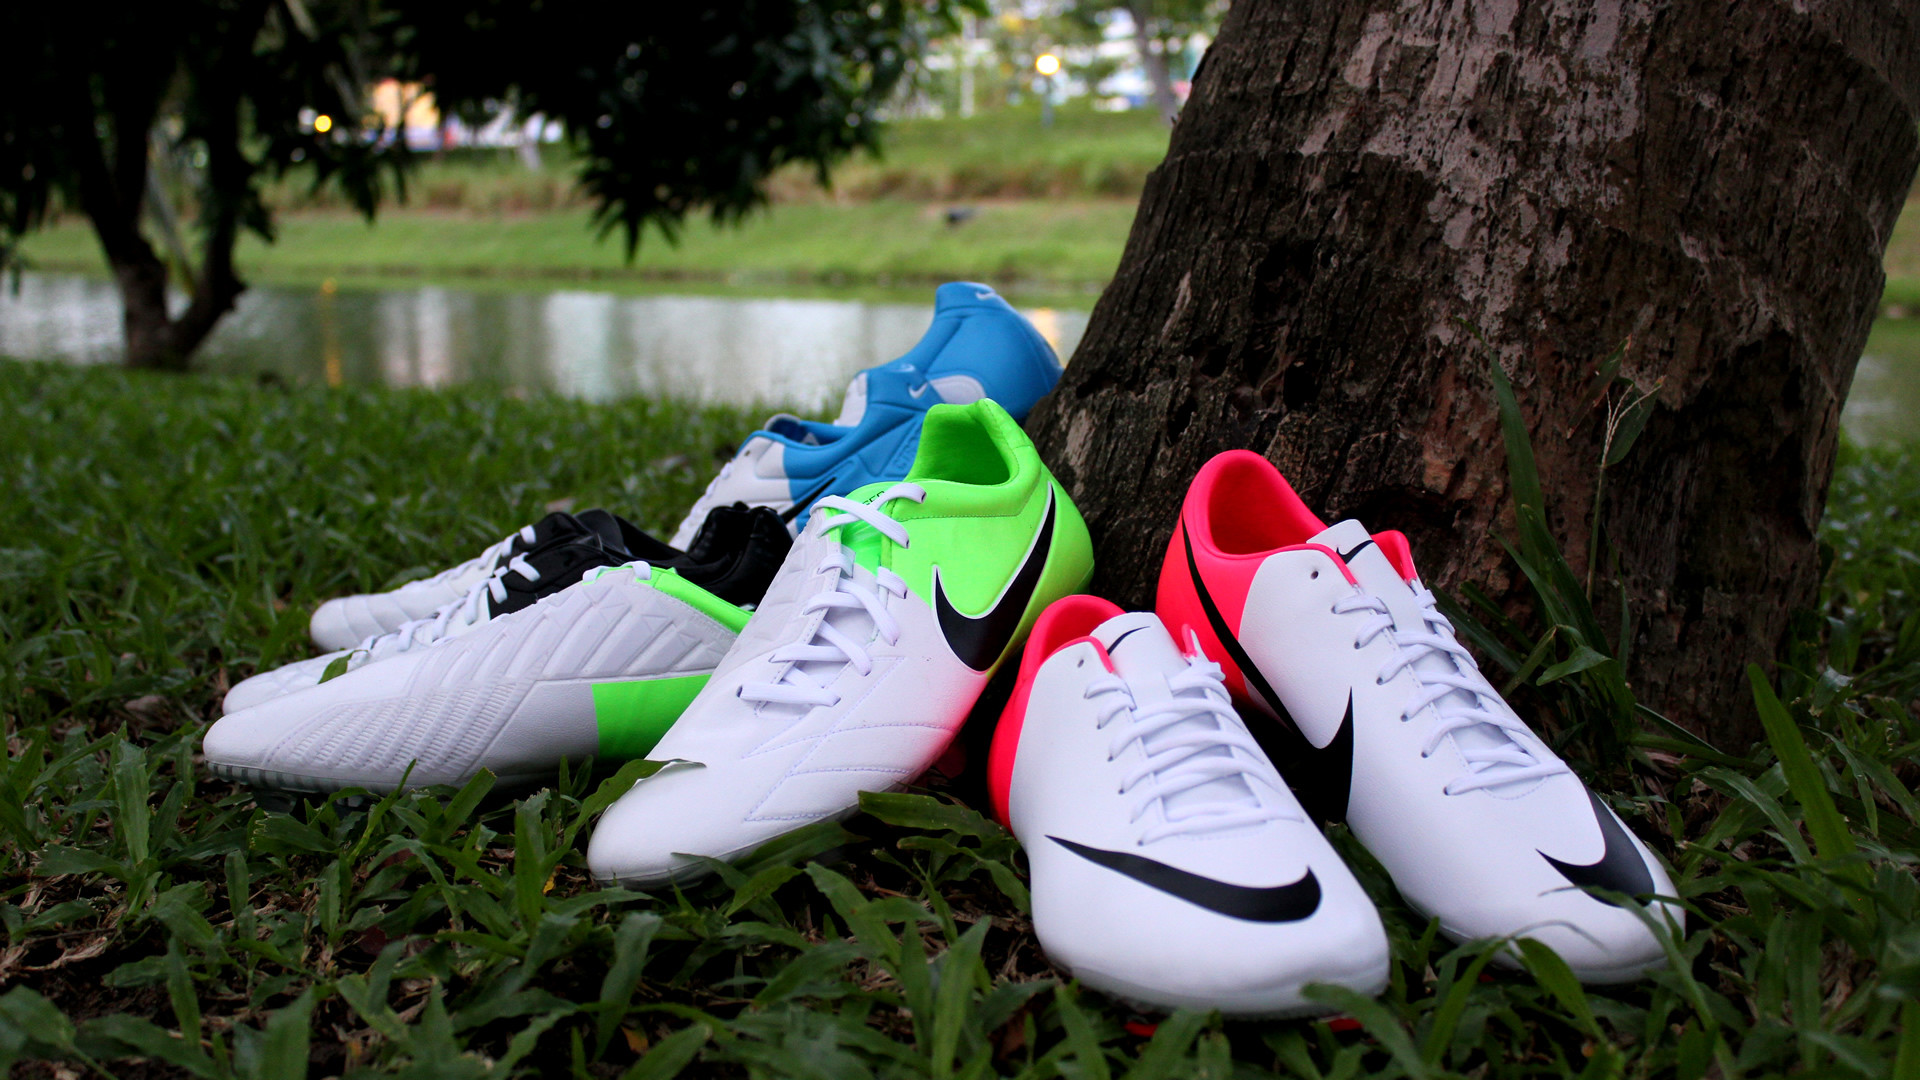 nike football boots hd wallpapers